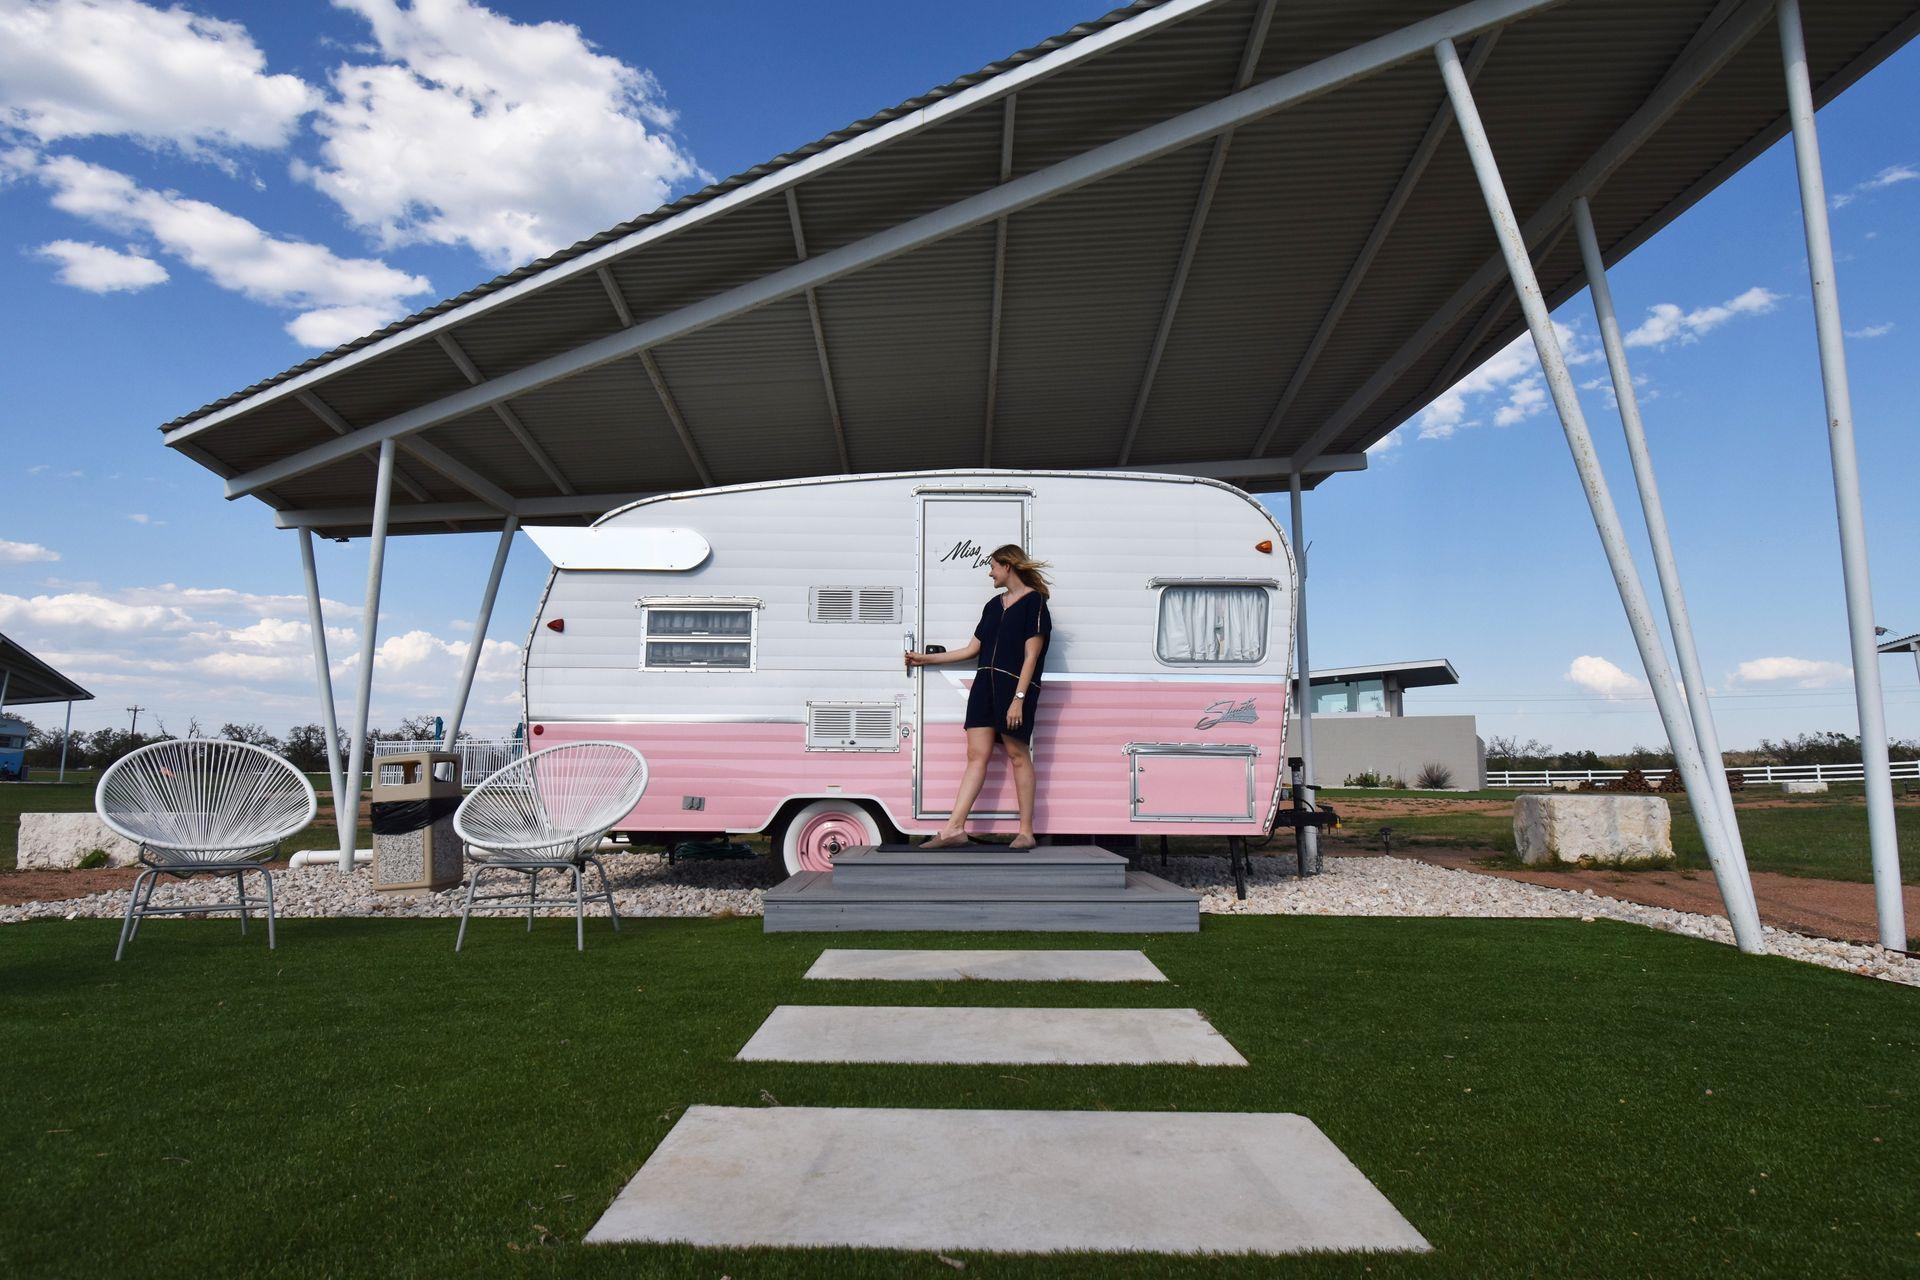 Lydia standing in front of a pink and white trailer at Blue Skies Retro Resort. She wears a blue dress and is holding the door.